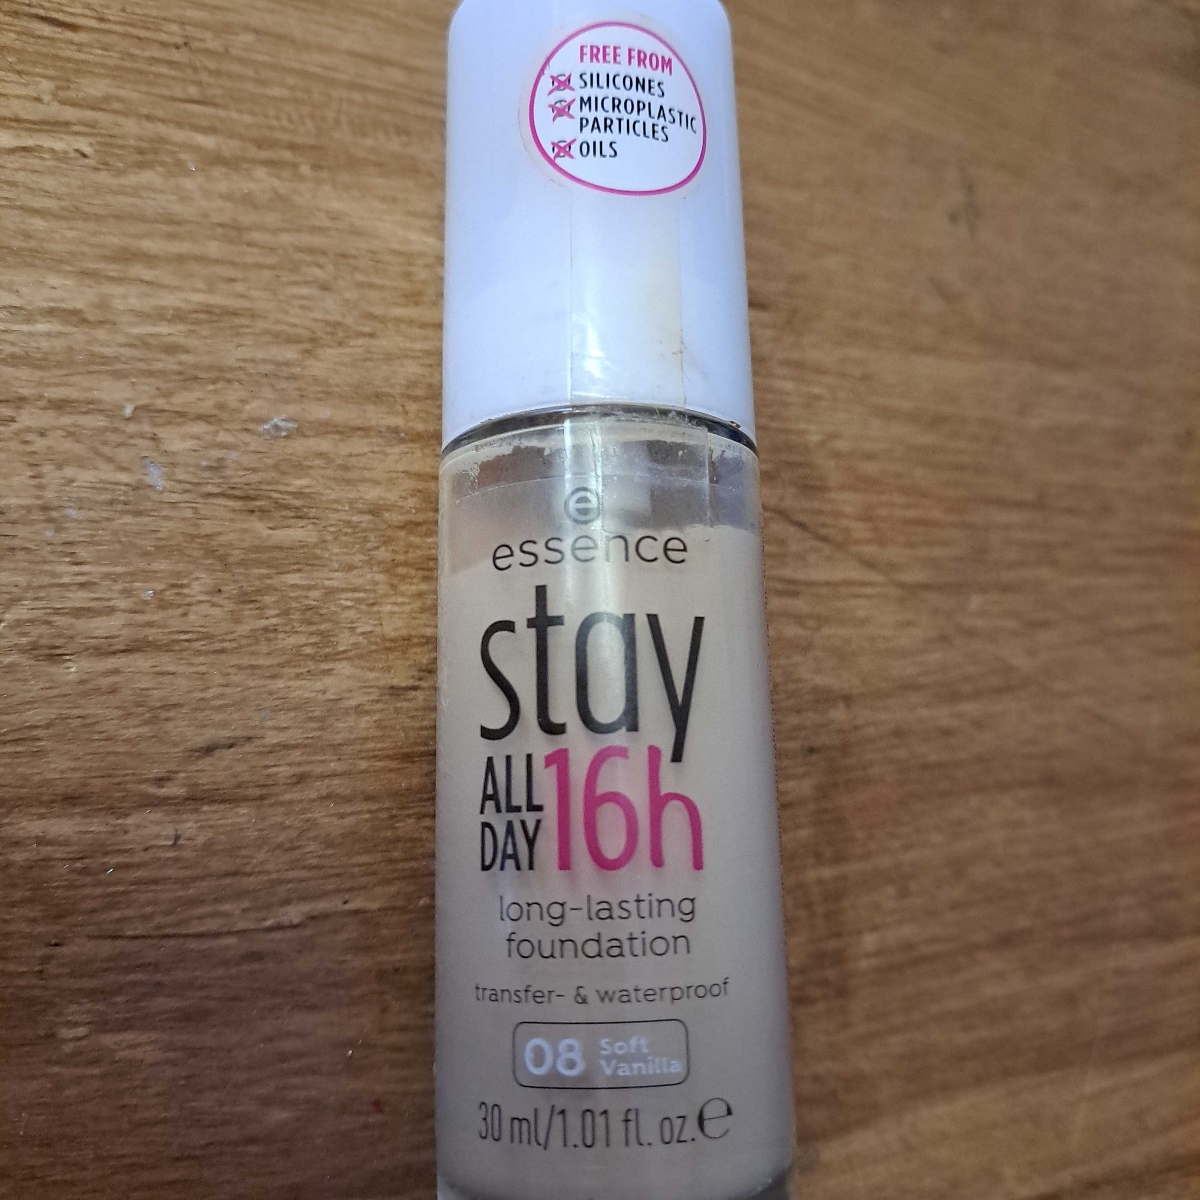 Essence stay all day 16h long-lasting foundation 08 soft vanilla Reviews |  abillion